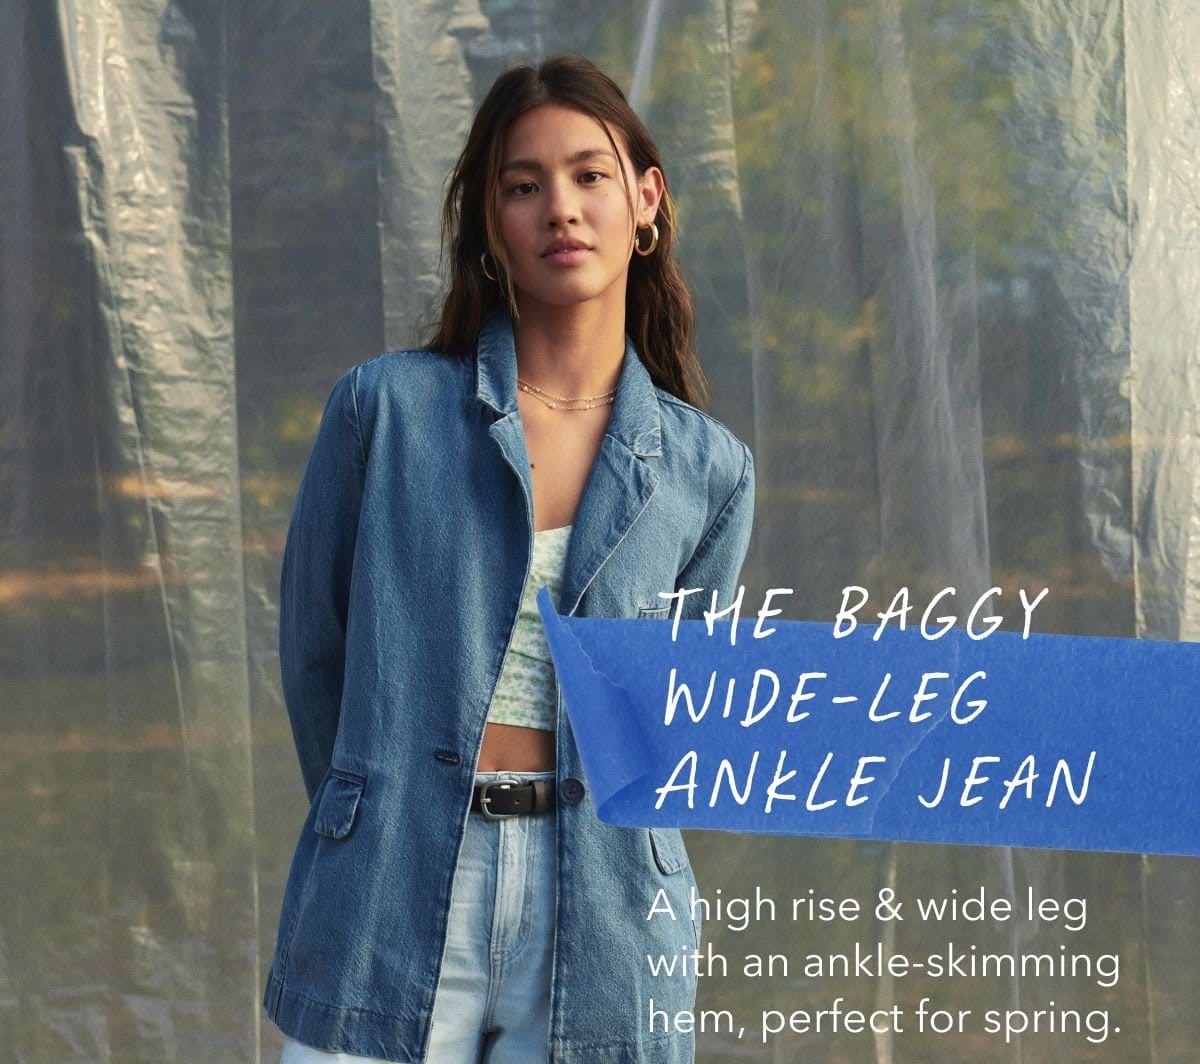 The Baggy Wide-Leg Ankle Jean A high rise & wide leg with an ankle-skimming hem, perfect for spring.